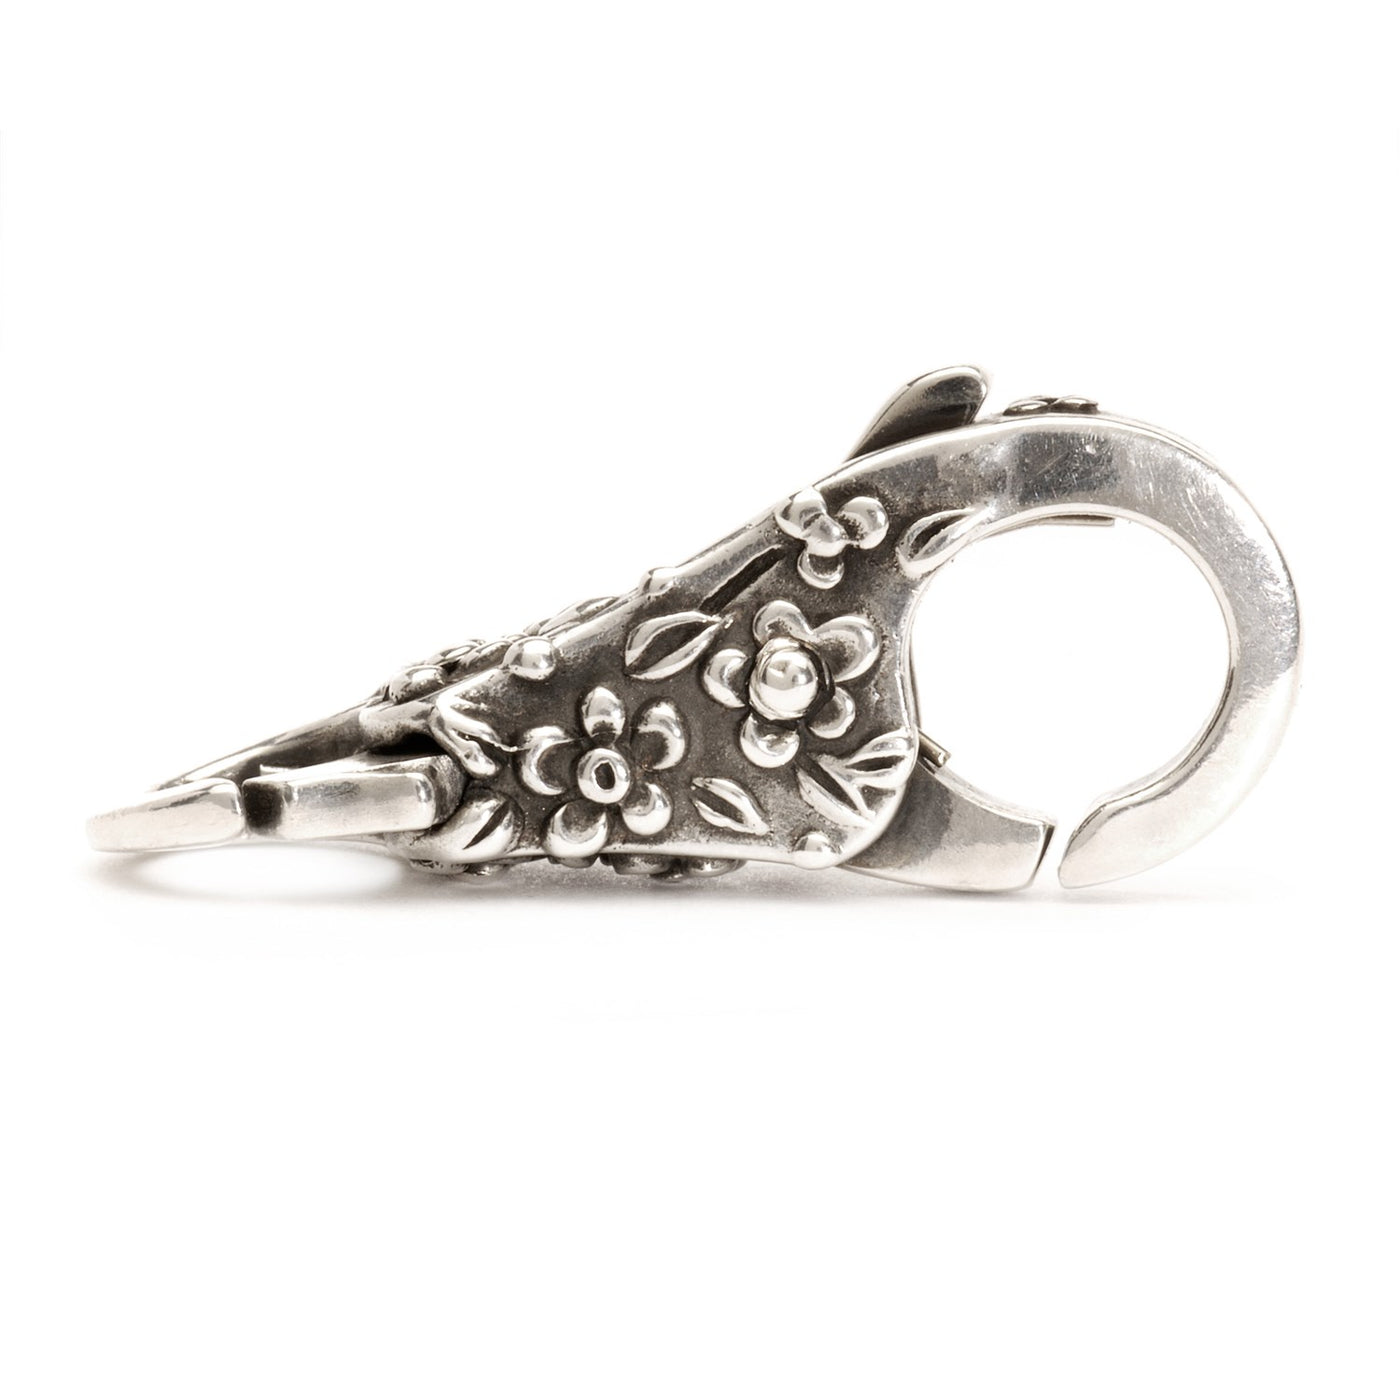 Silver 'Lace Clasp' with a delicate flower design, used to fasten a bracelet or necklace with elegance.